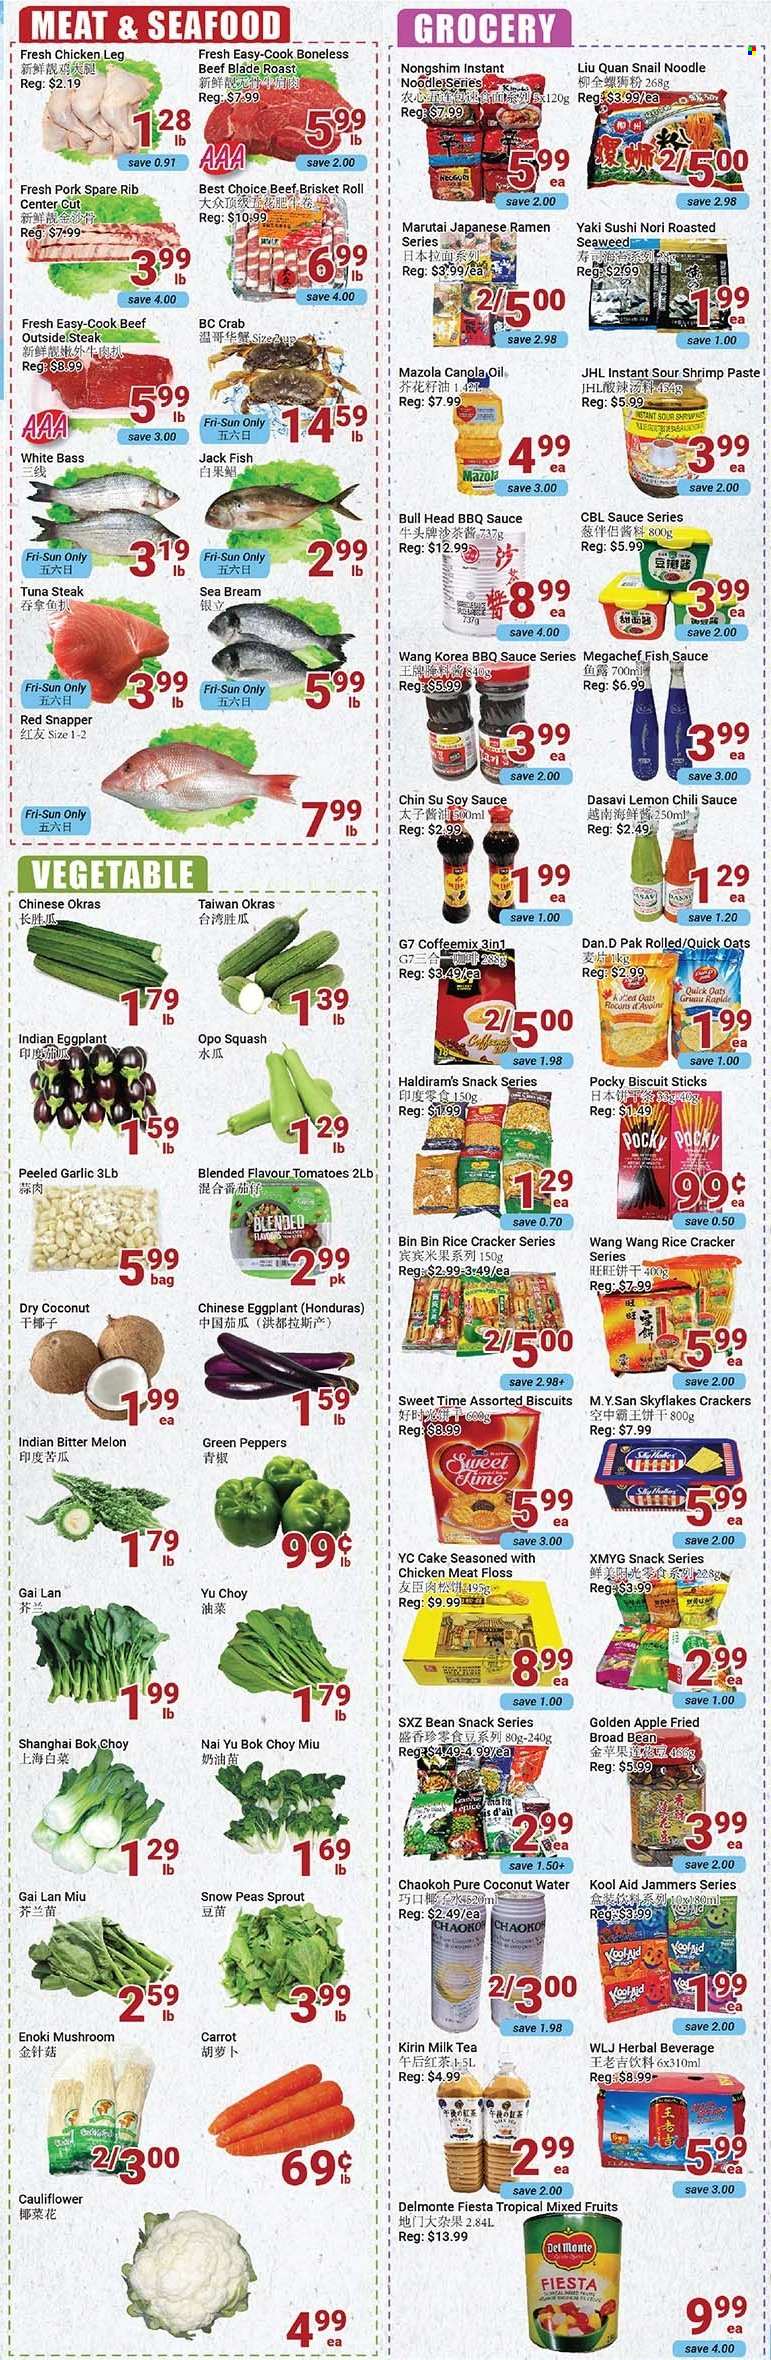 thumbnail - Oceans Flyer - December 02, 2022 - December 08, 2022 - Sales products - mushrooms, cake, bok choy, garlic, tomatoes, peas, peppers, eggplant, melons, red snapper, tuna, seafood, crab, fish, seabream, shrimps, ramen, sauce, noodles, milk, snow peas, snack, crackers, biscuit, Skyflakes, rice crackers, oats, seaweed, tuna steak, Del Monte, Quick Oats, rice, BBQ sauce, fish sauce, soy sauce, chilli sauce, canola oil, oil, coconut water, tea, chicken legs, chicken, beef meat, beef brisket, kool aid, steak. Page 2.